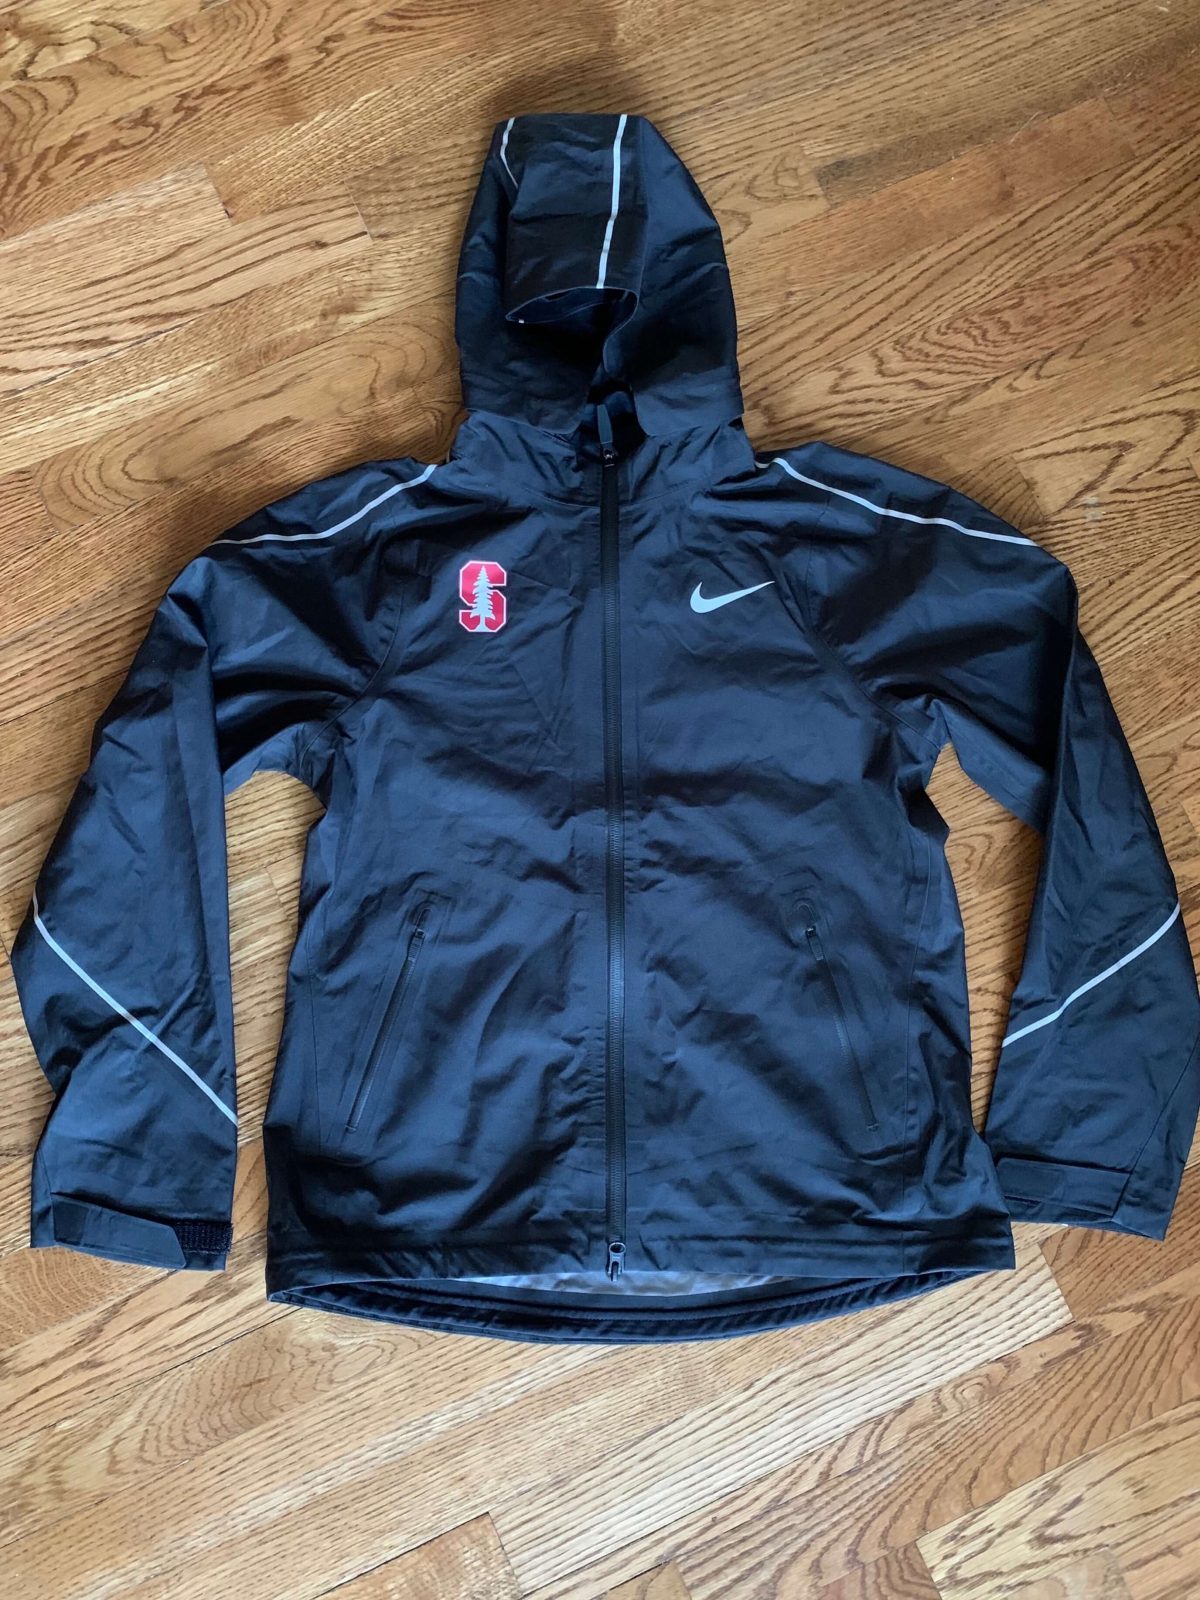 Jenna Gray Stanford Volleyball Nike Hooded Jacket : NARP Clothing